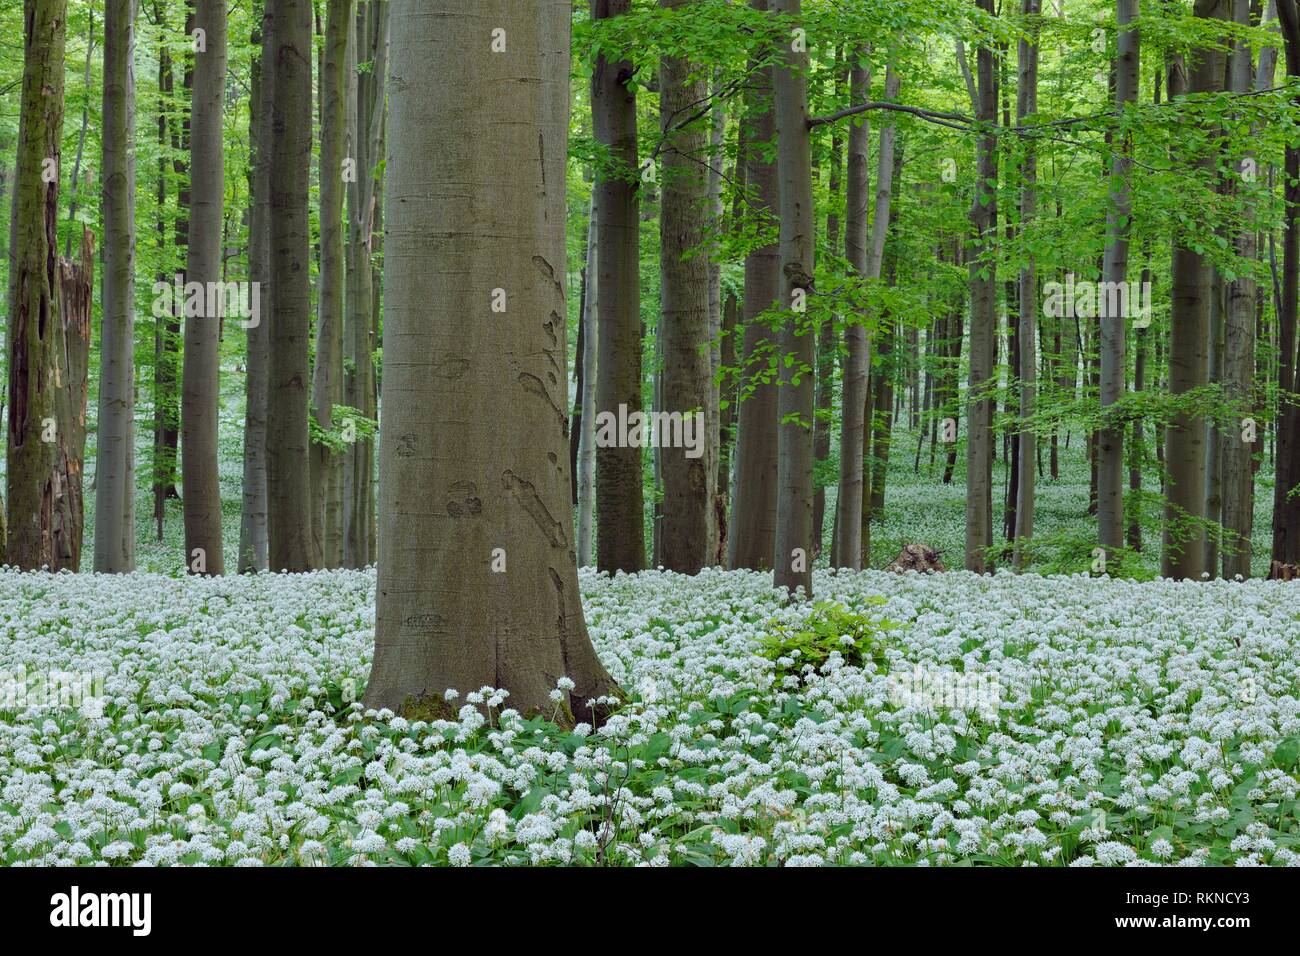 Ramsons (Allium ursinum) in beech (fagus sylvatica) forest, spring with lush green foliage. Hainich National Park, Thuringia, Germany. Stock Photo